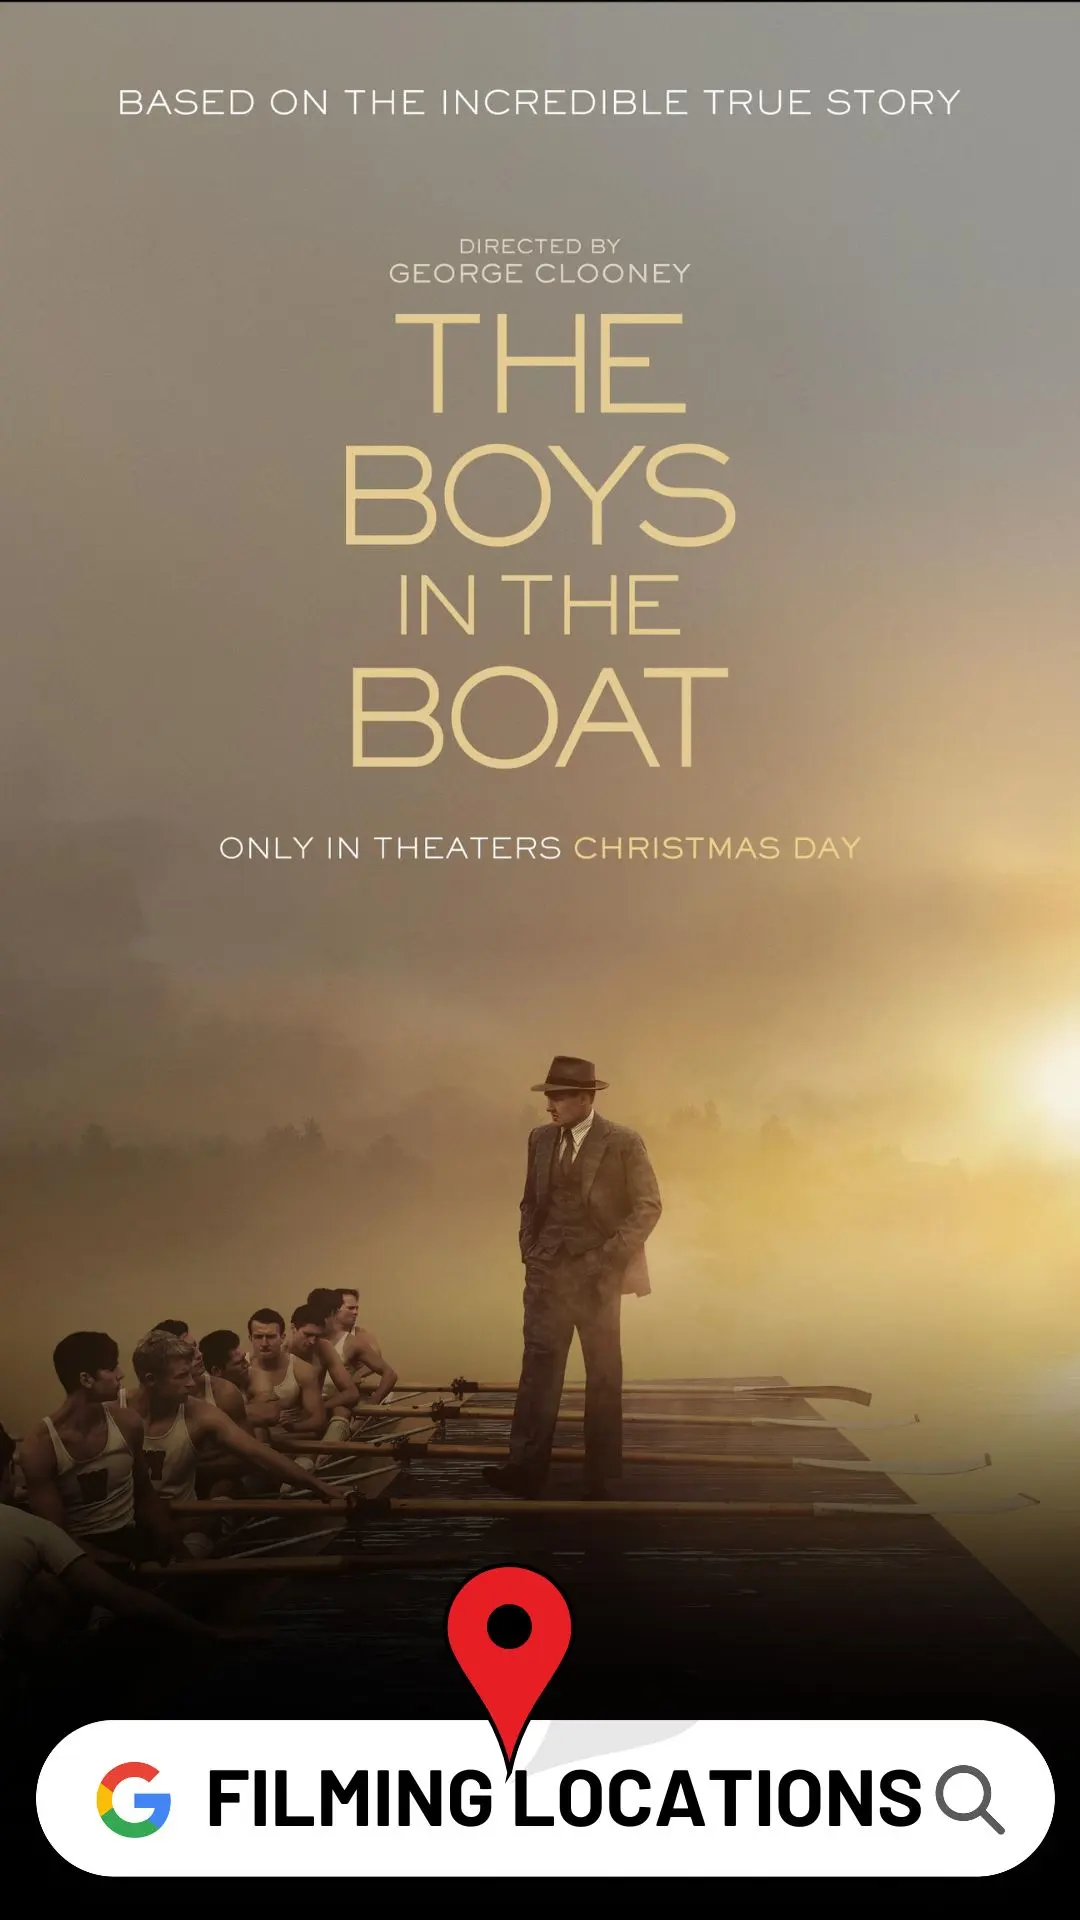 The Boys in the Boat Filming Locations